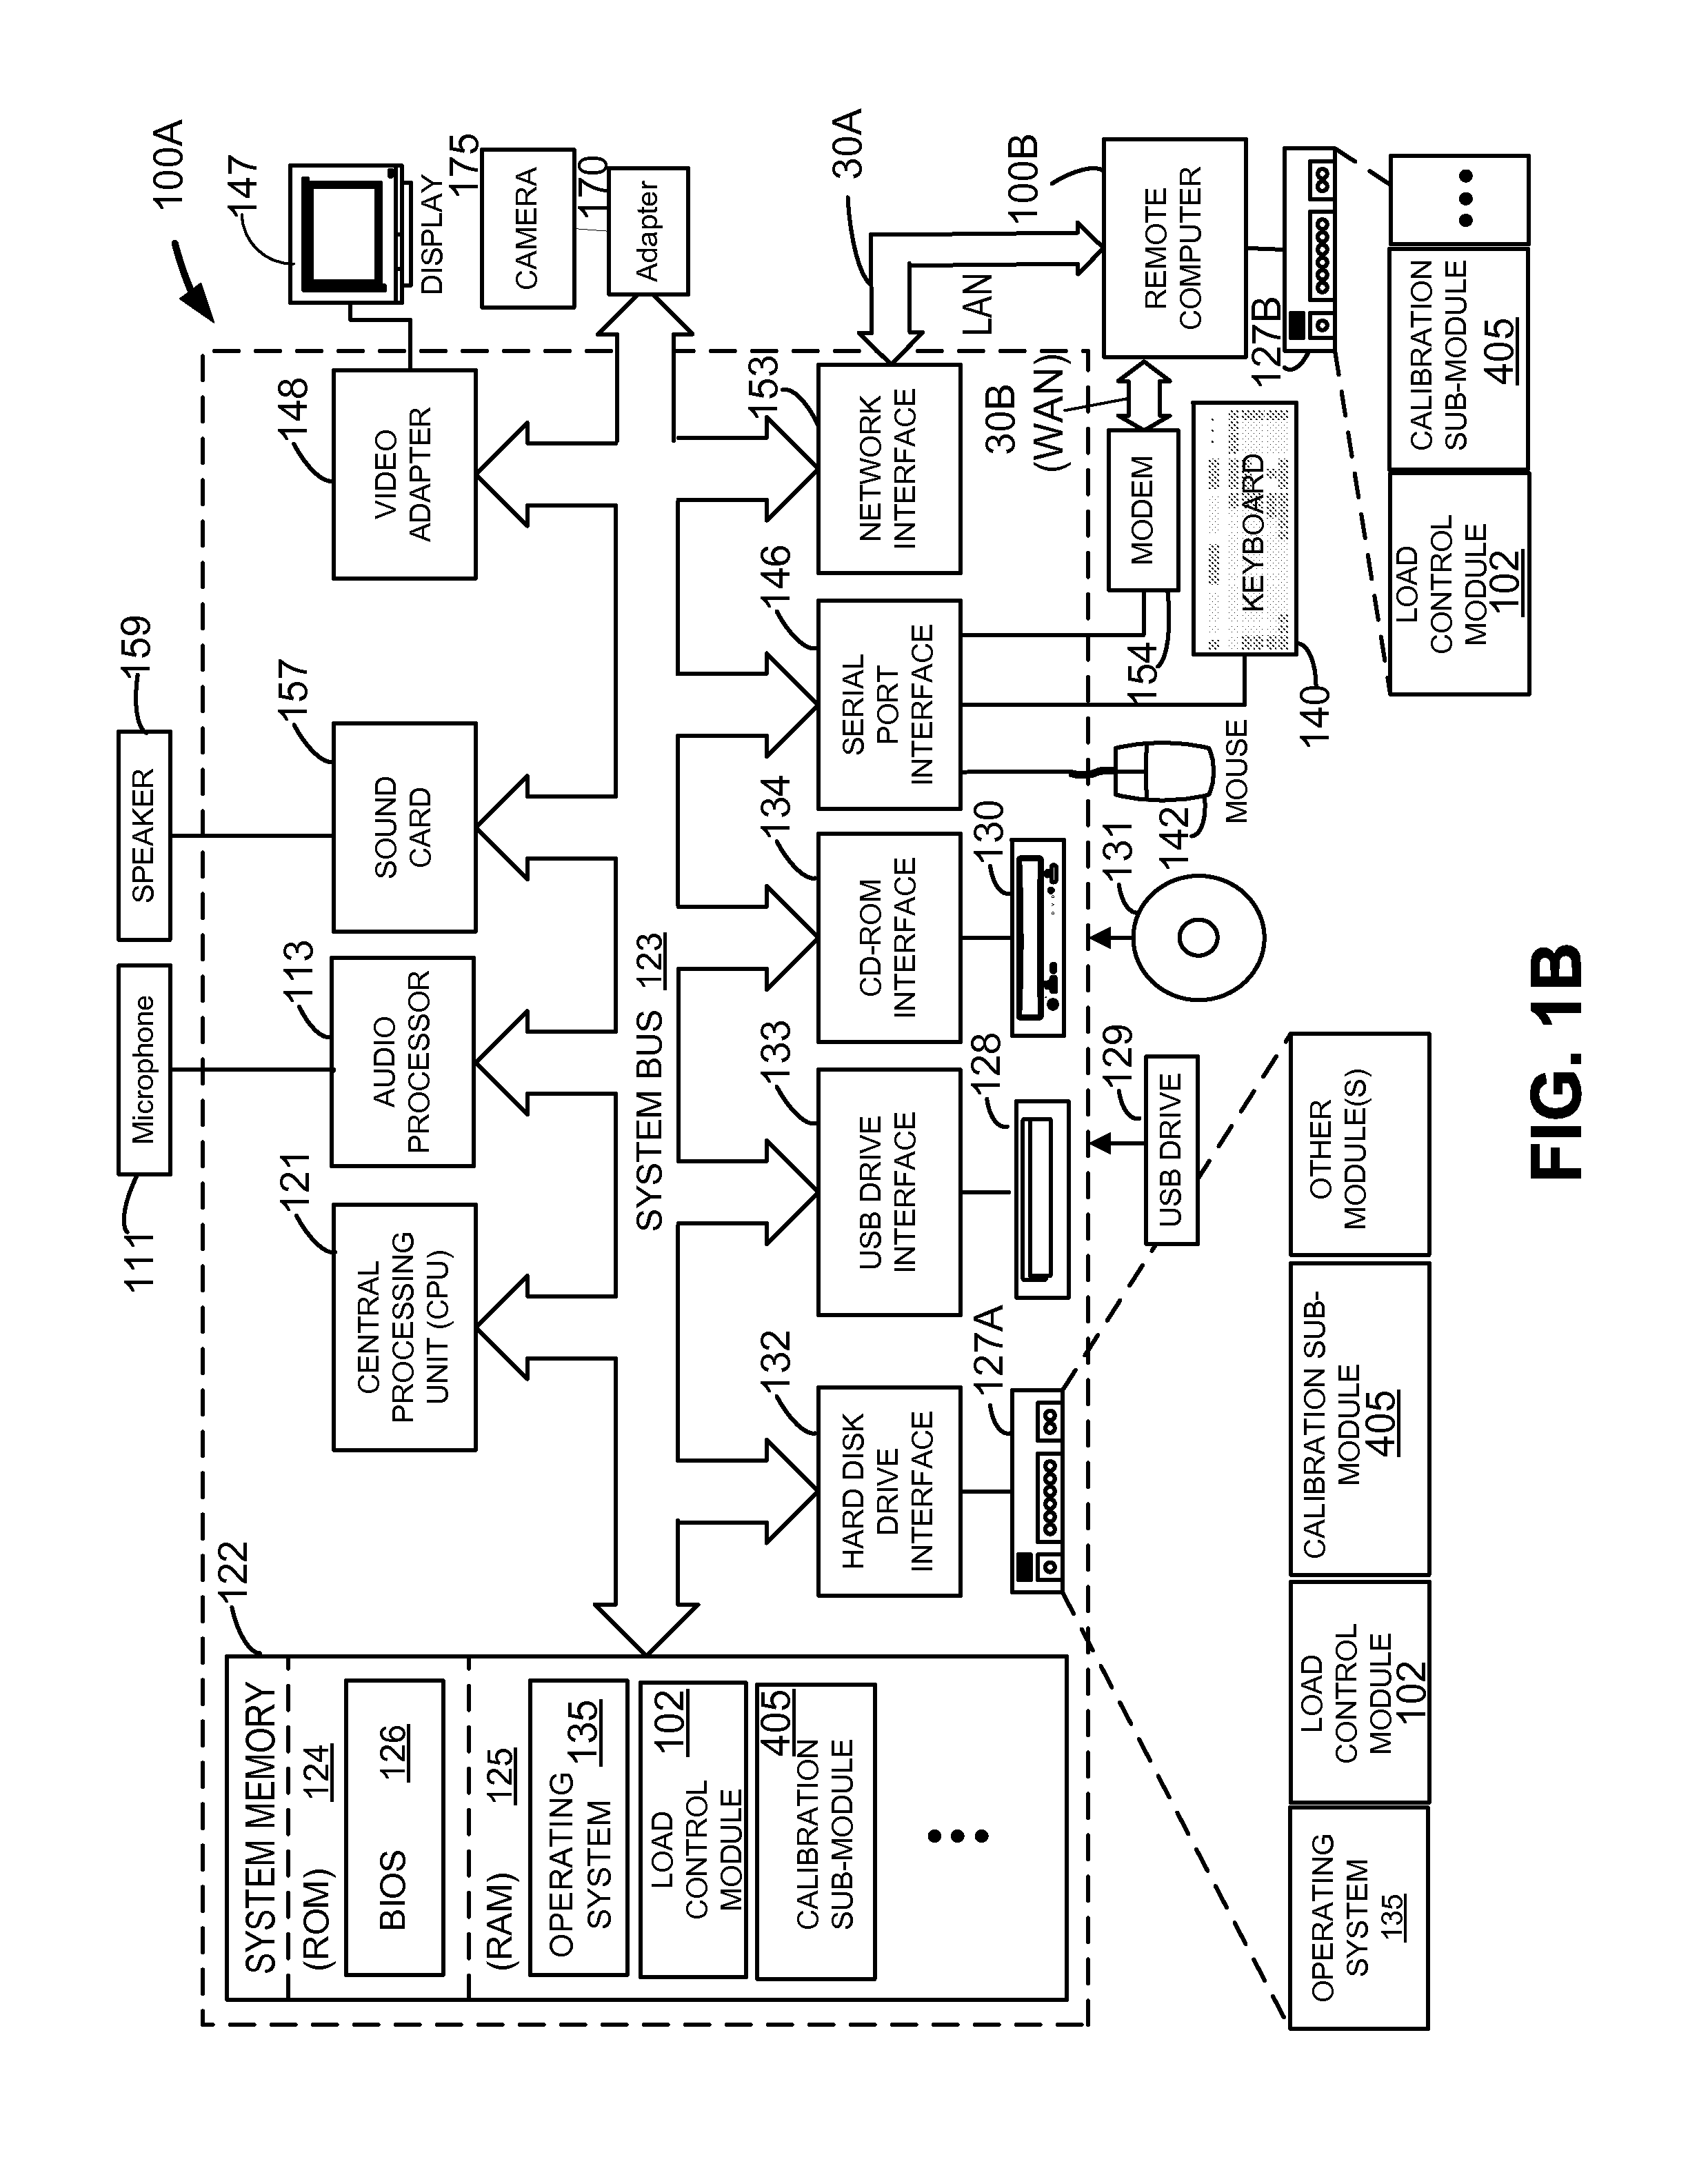 System and method for using climate controlled spaces as energy storage units for "receiving" surplus energy and for "supplying" energy when needed